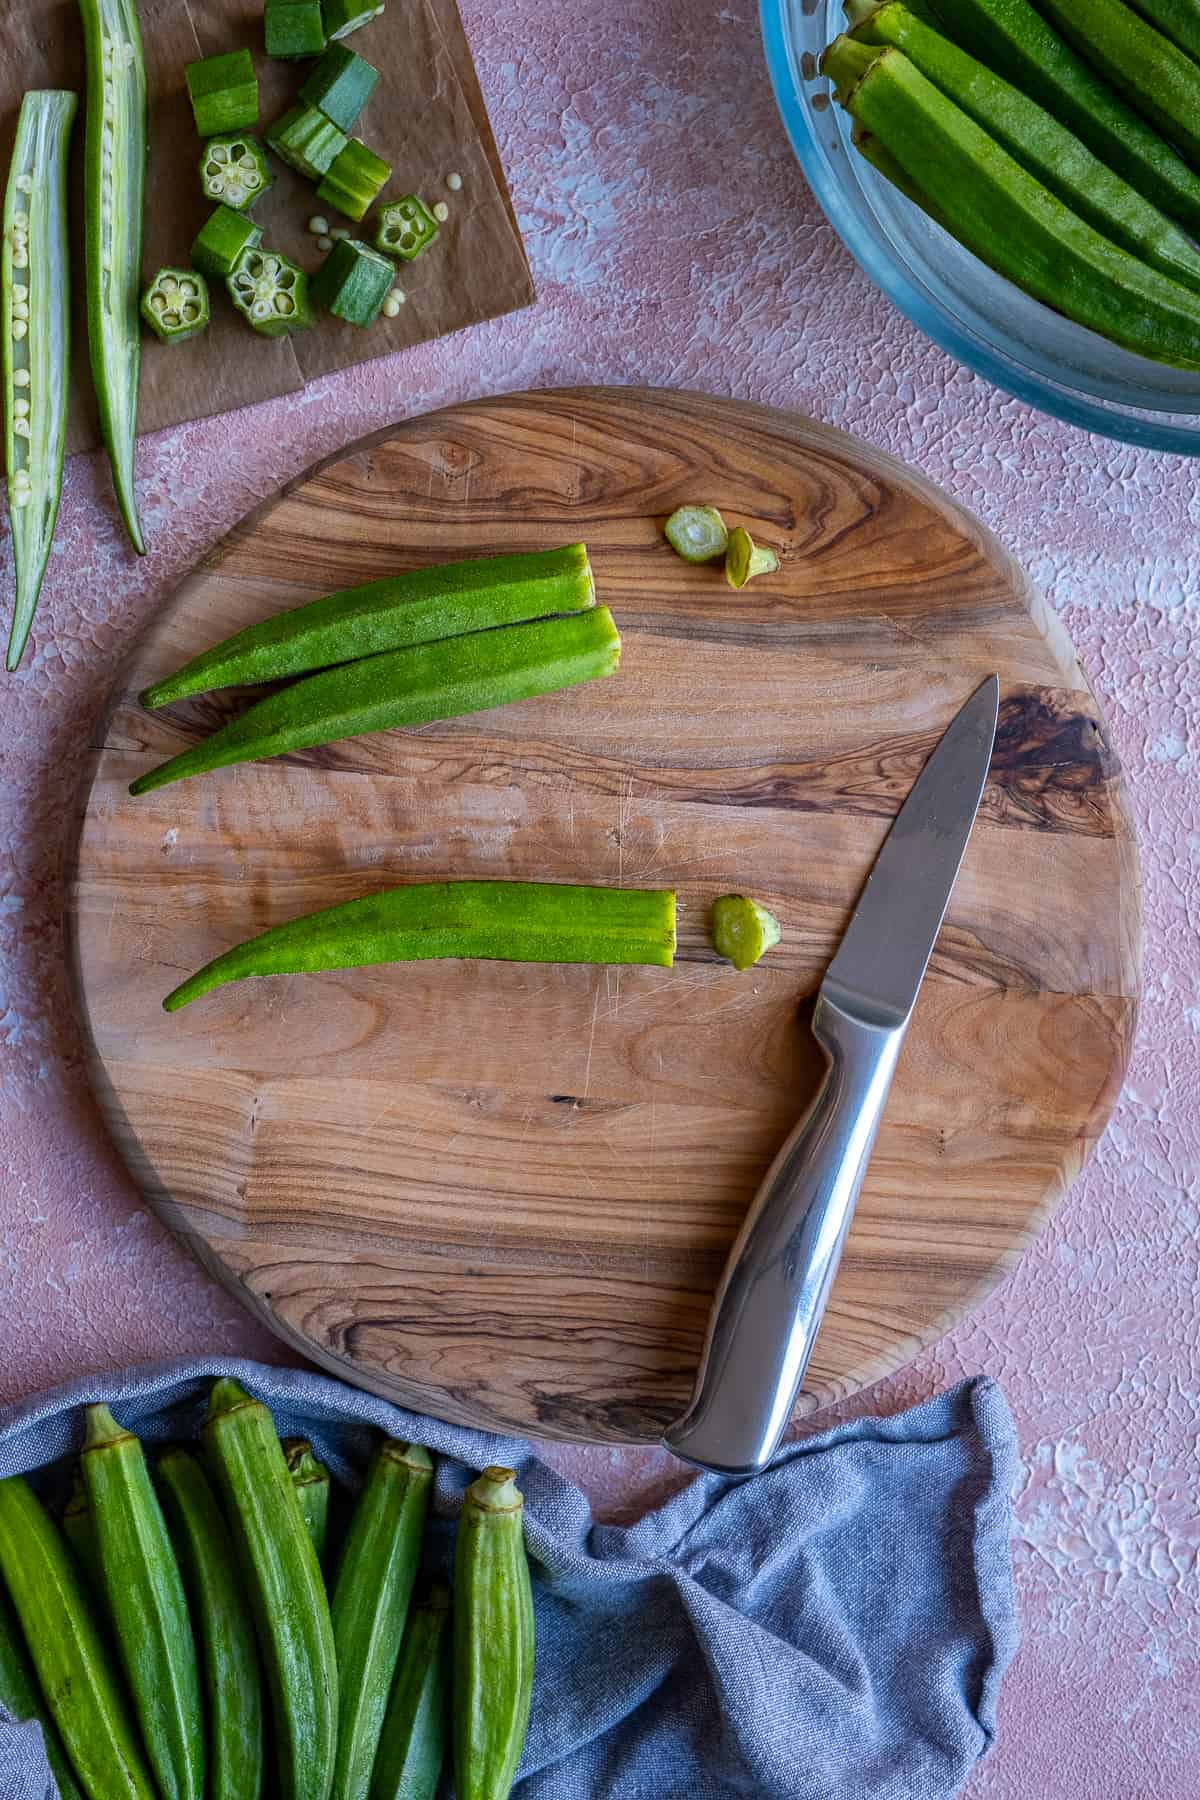 Okra pods being trimmed on a wooden board, a knife on the side.